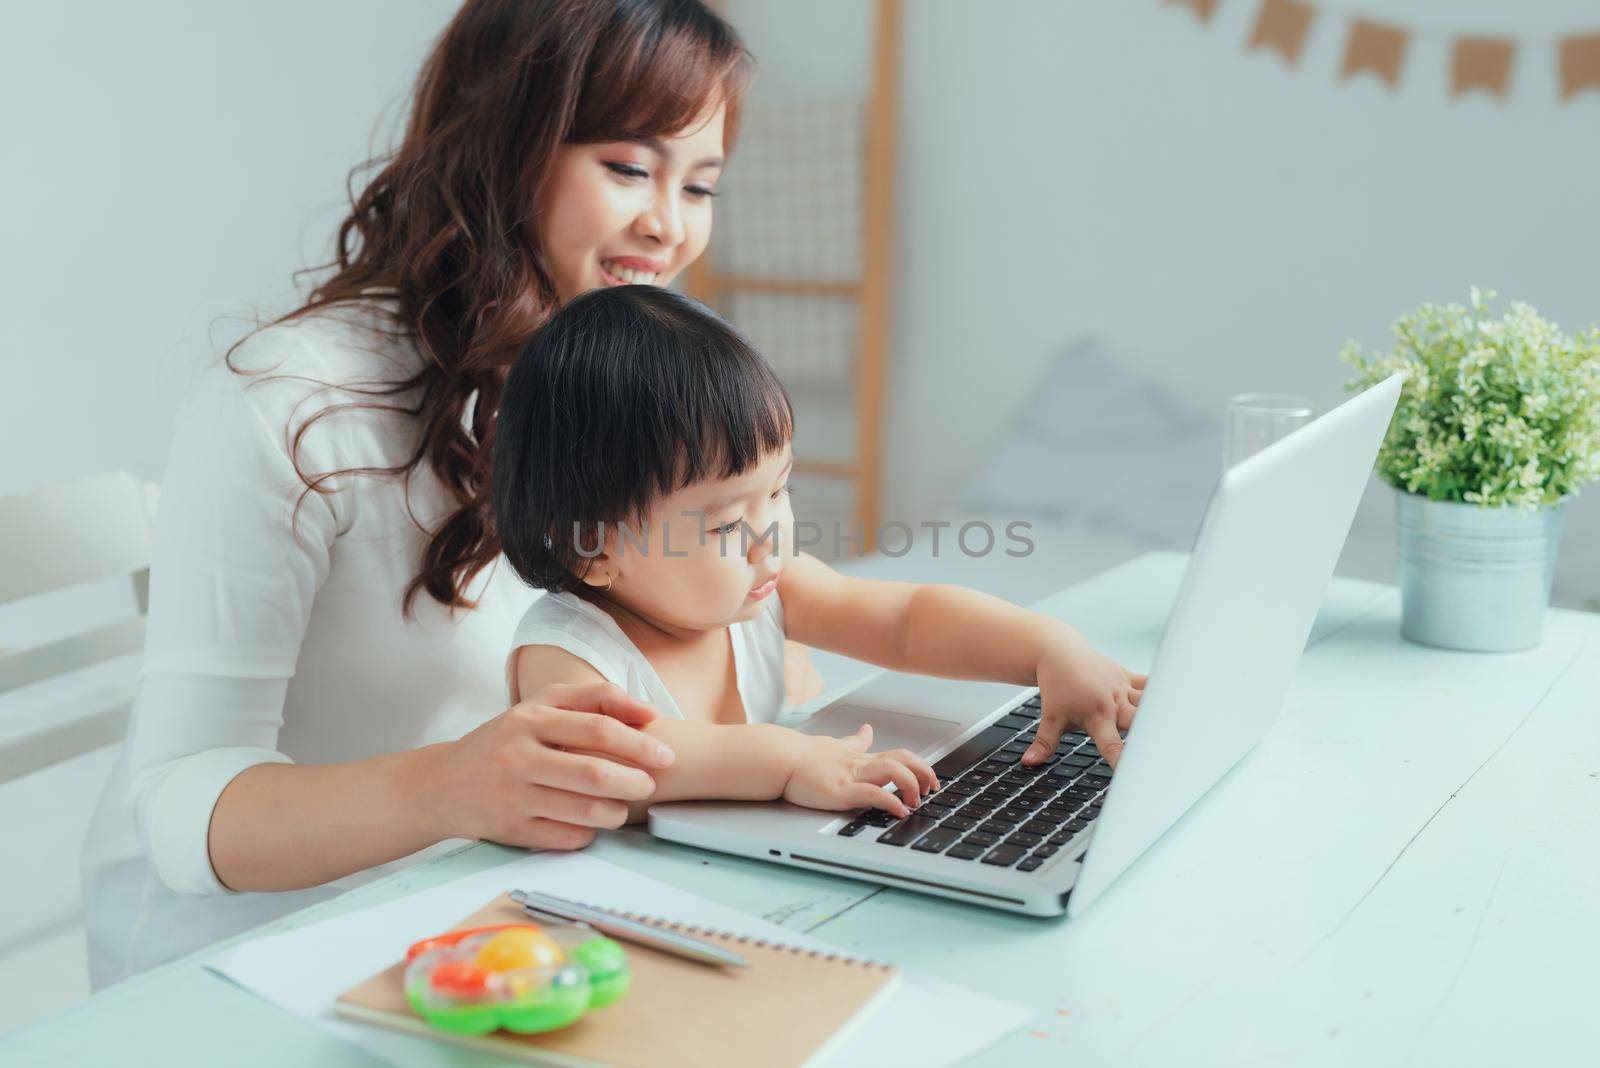 Young mother on maternity leave trying to freelance by the desk with toddler child. by makidotvn